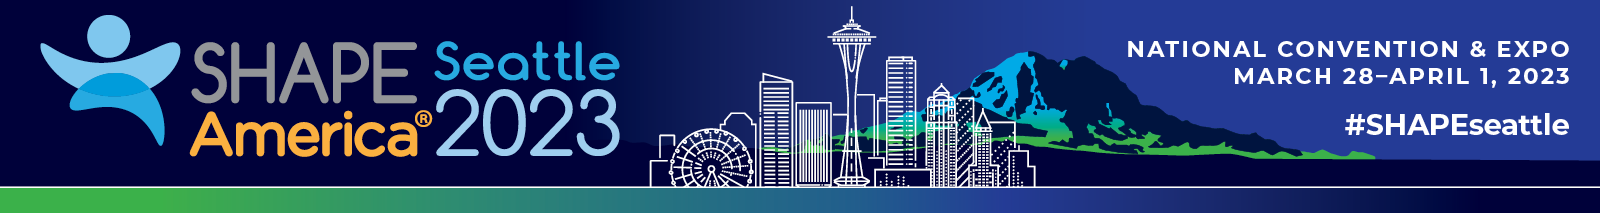 Join Us in #SHAPEseattle March 28 through April 1